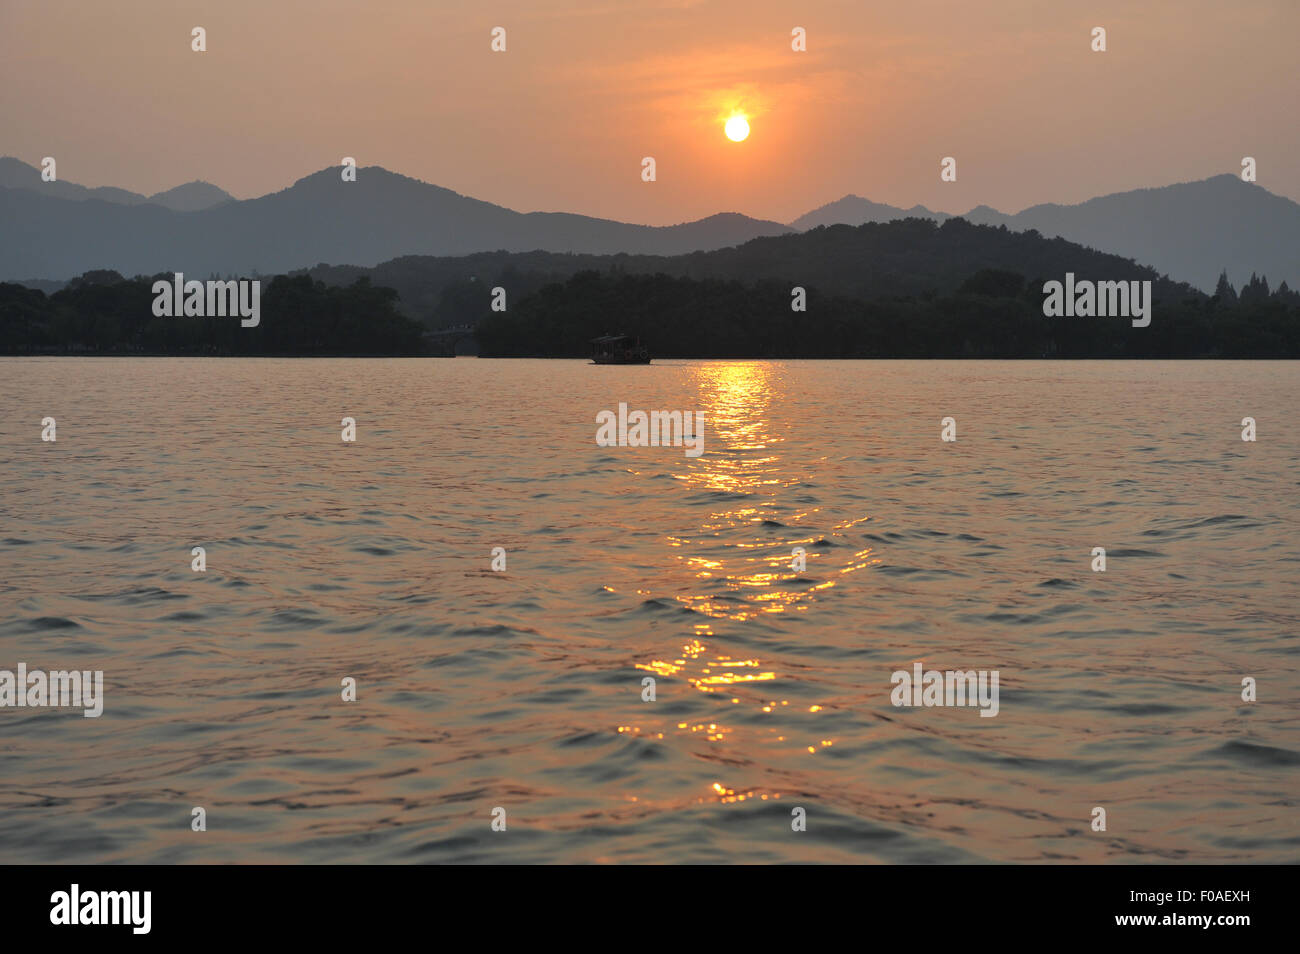 Sunset over lake, mountains in distance, Hangzhou, China Stock Photo